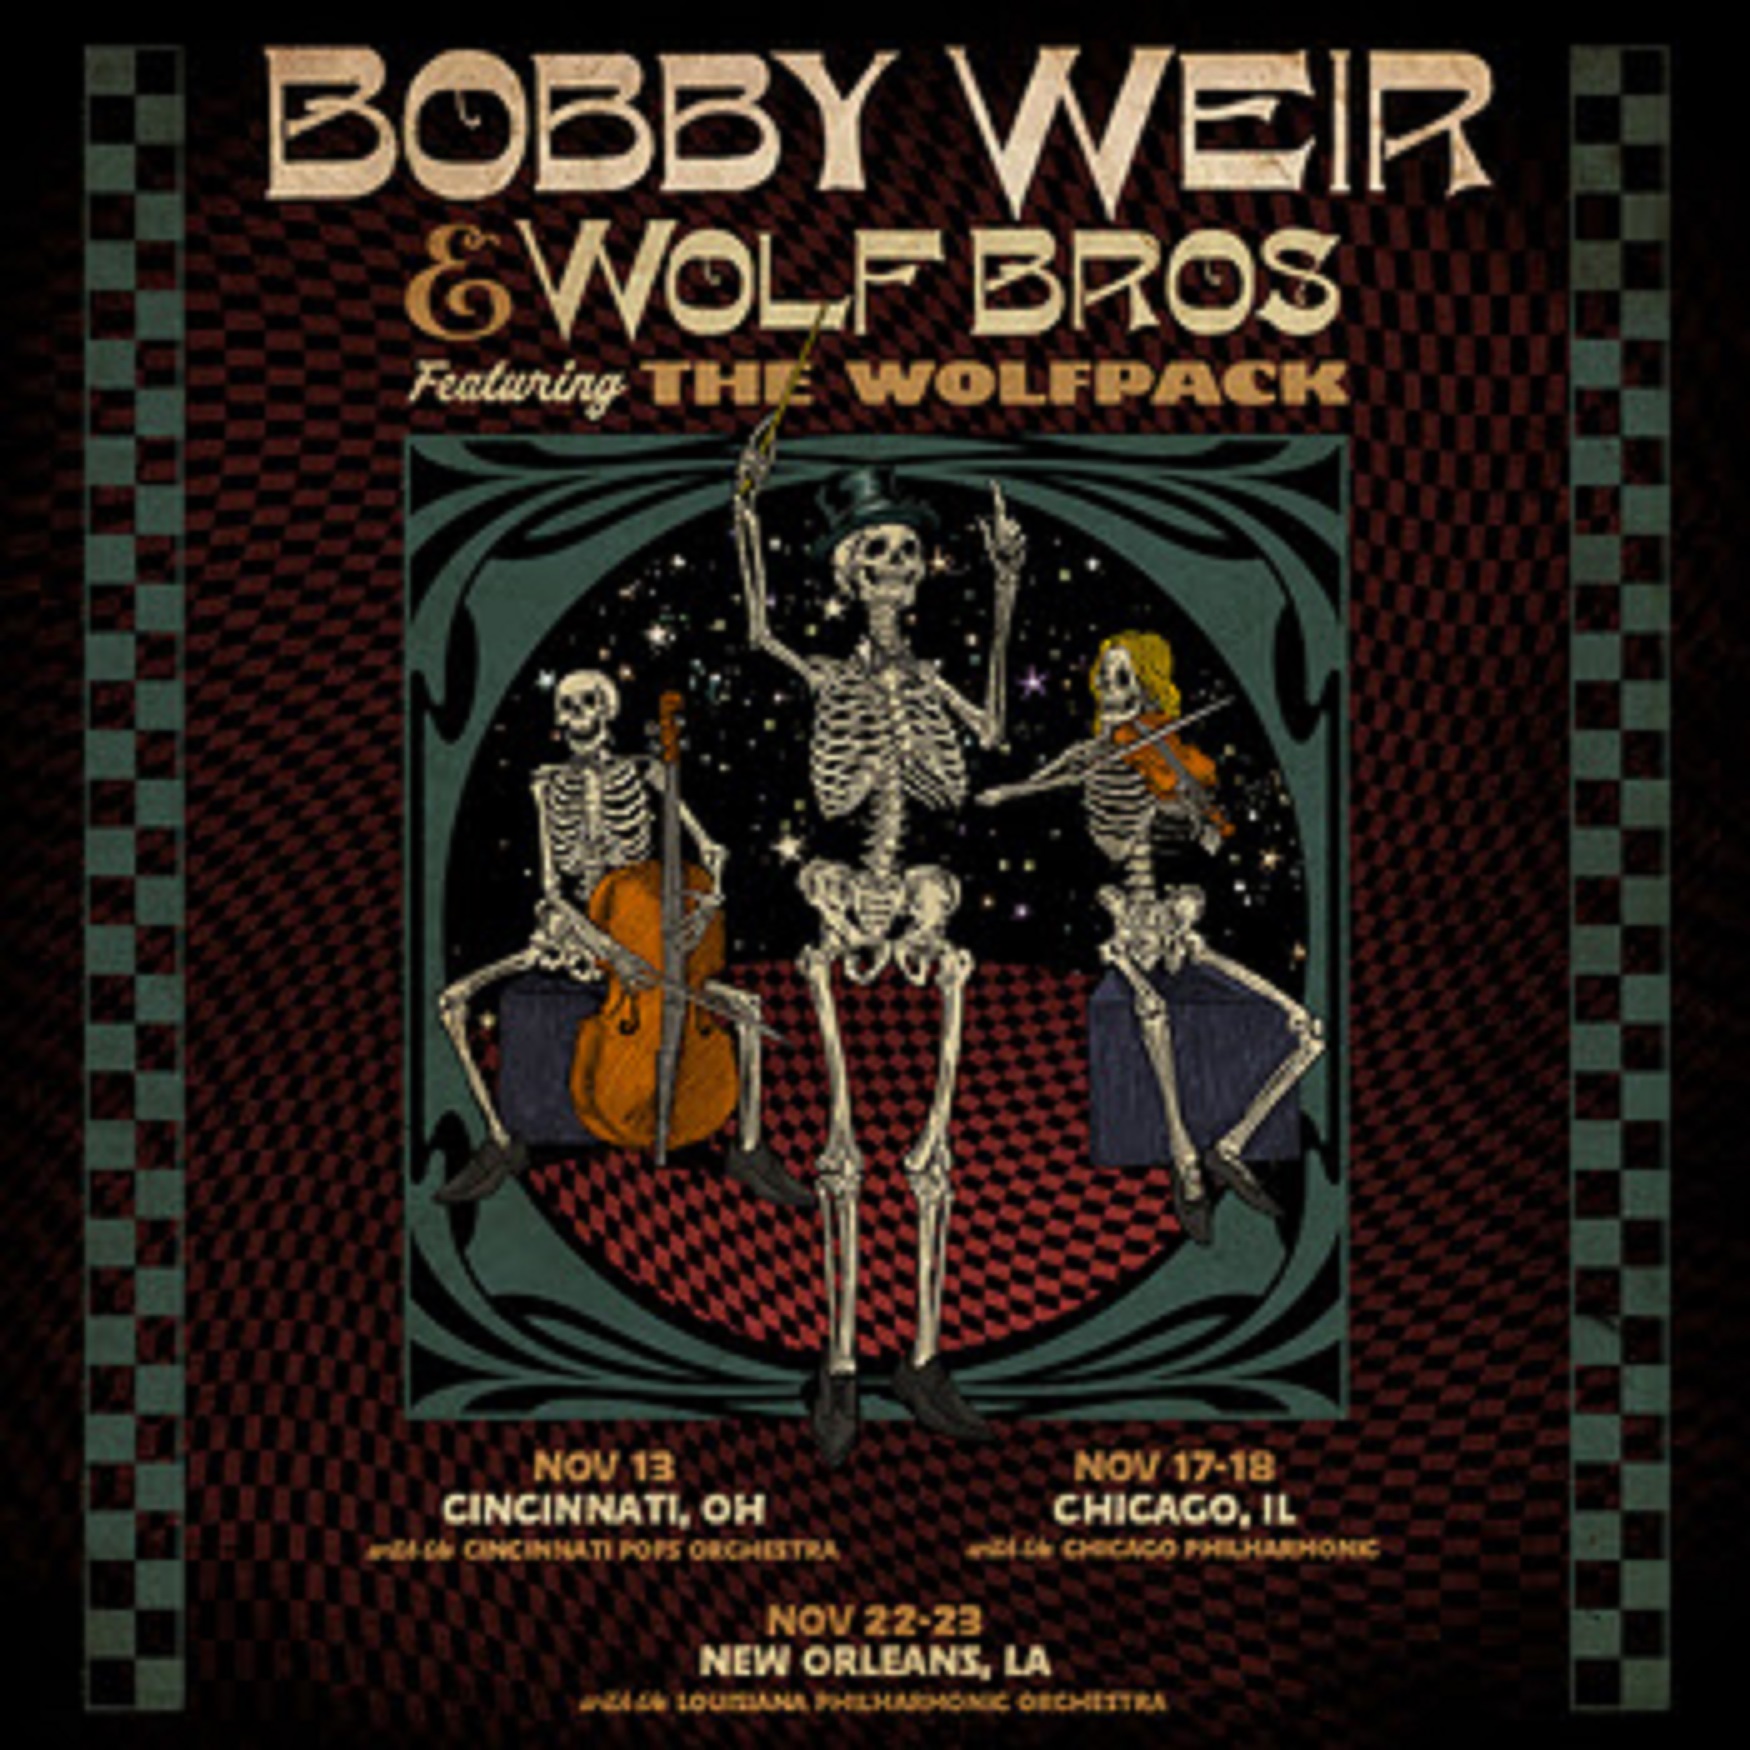 Bobby Weir & Wolf Bros featuring the Wolfpack confirm new fall symphony dates this November